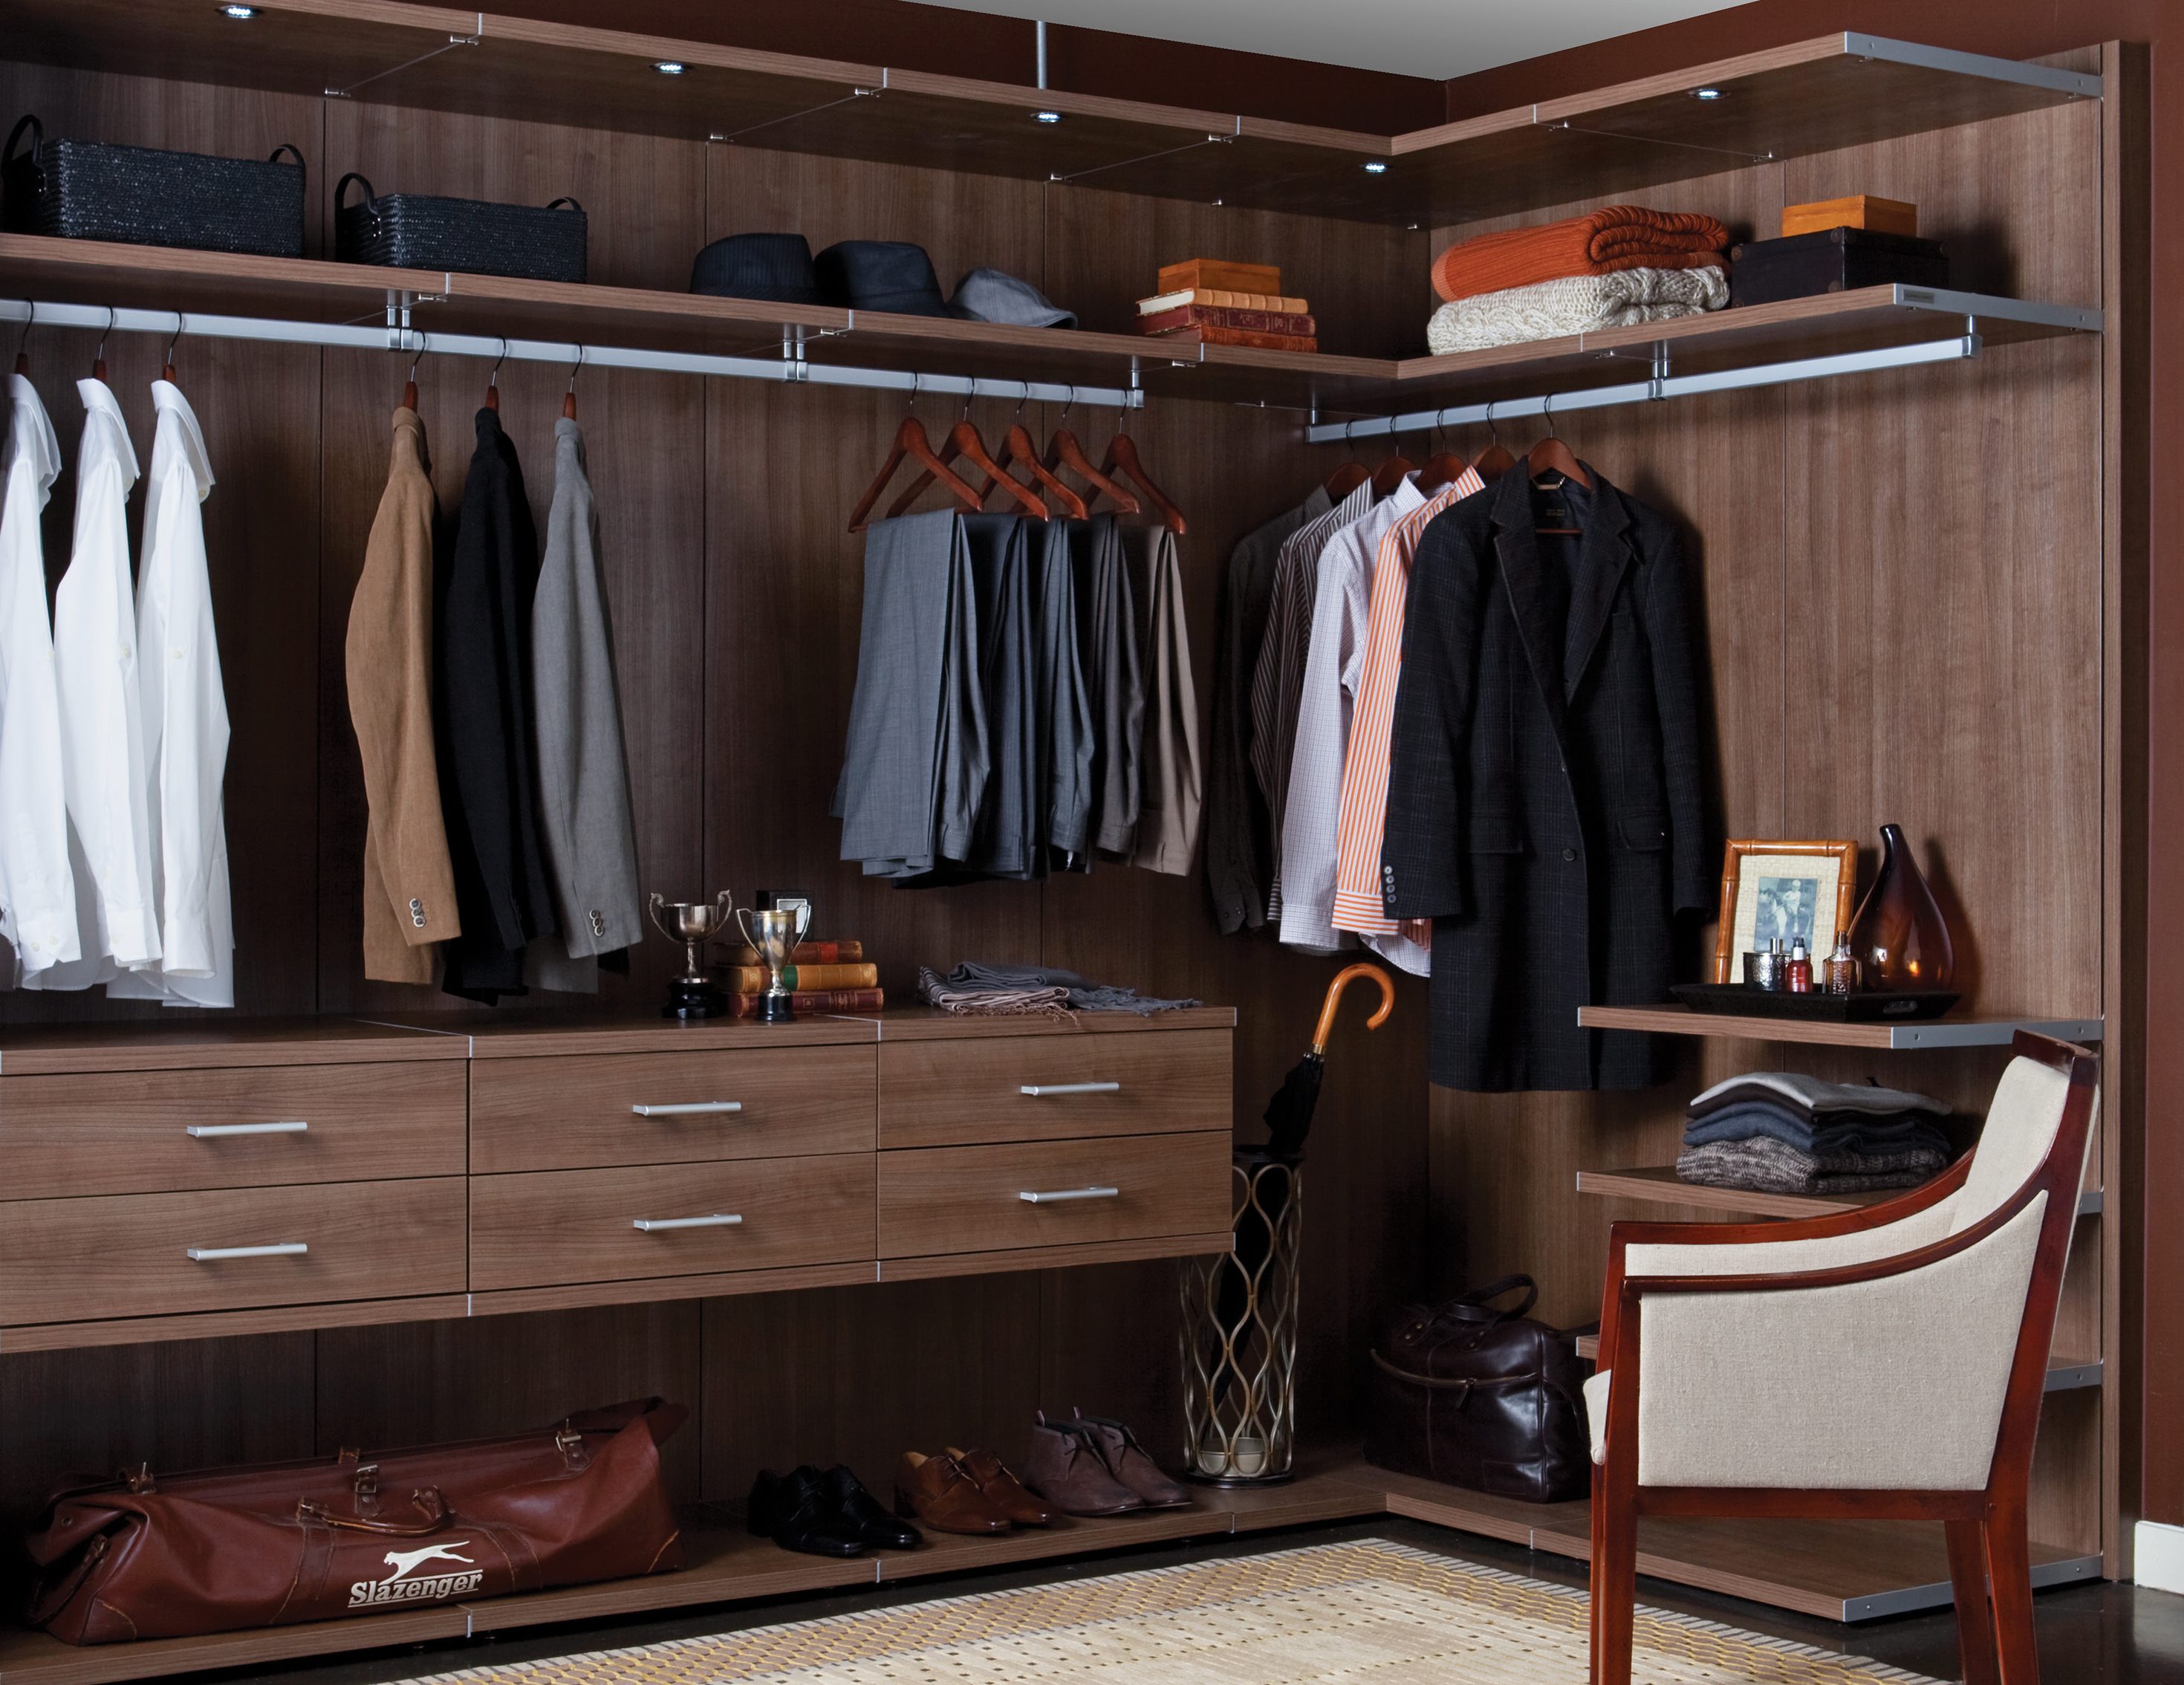 Dark Brown Wood Grain Walk in Closet with Drawers Shelves Metal Accents and Closet Rods